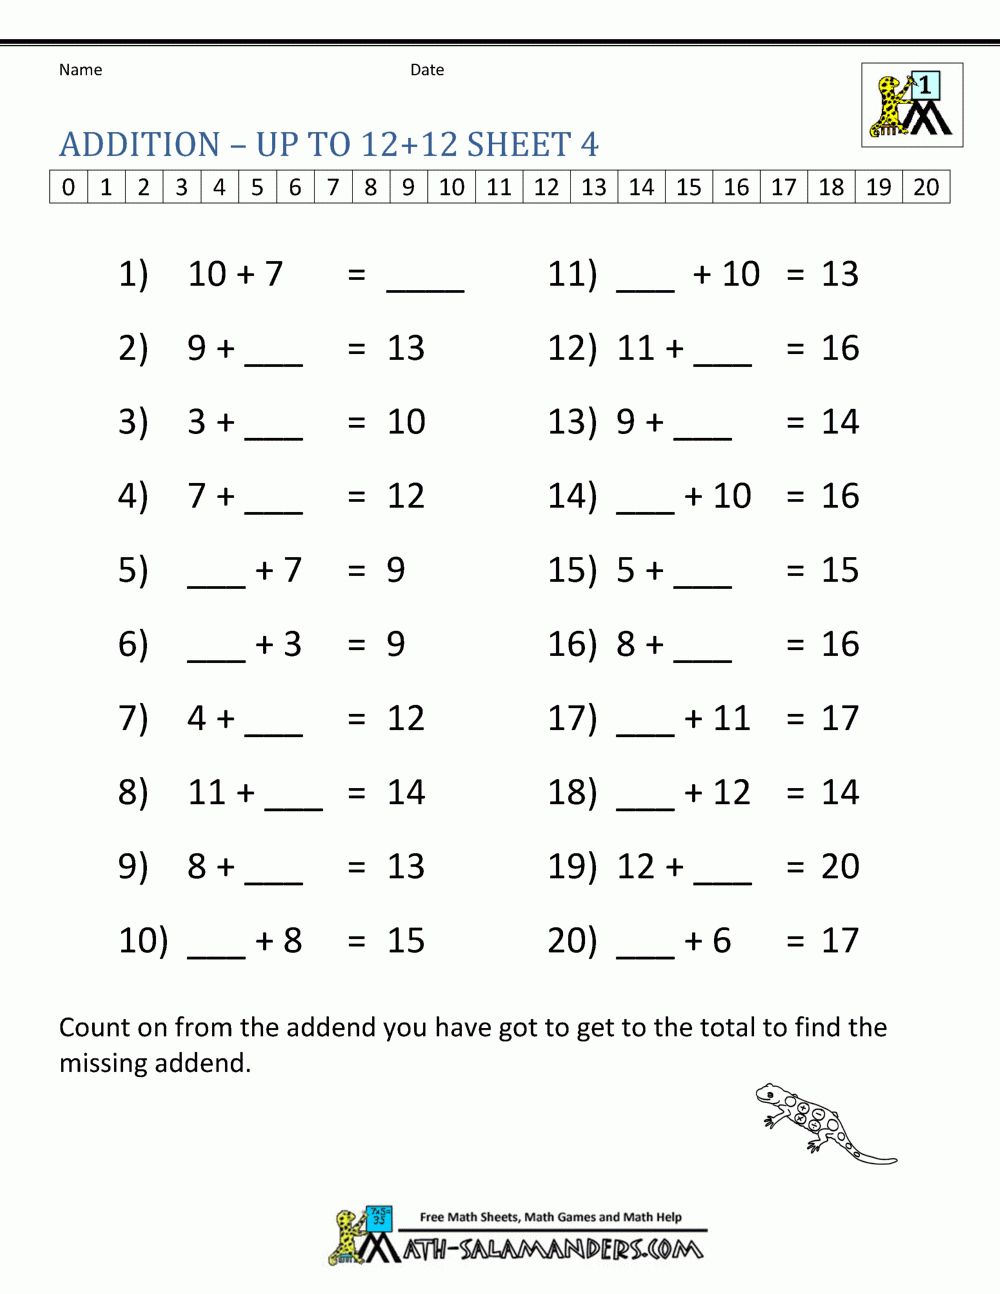 Learning Addition Facts Worksheets 1St Grade | Free Printable Addition Worksheets For 1St Grade